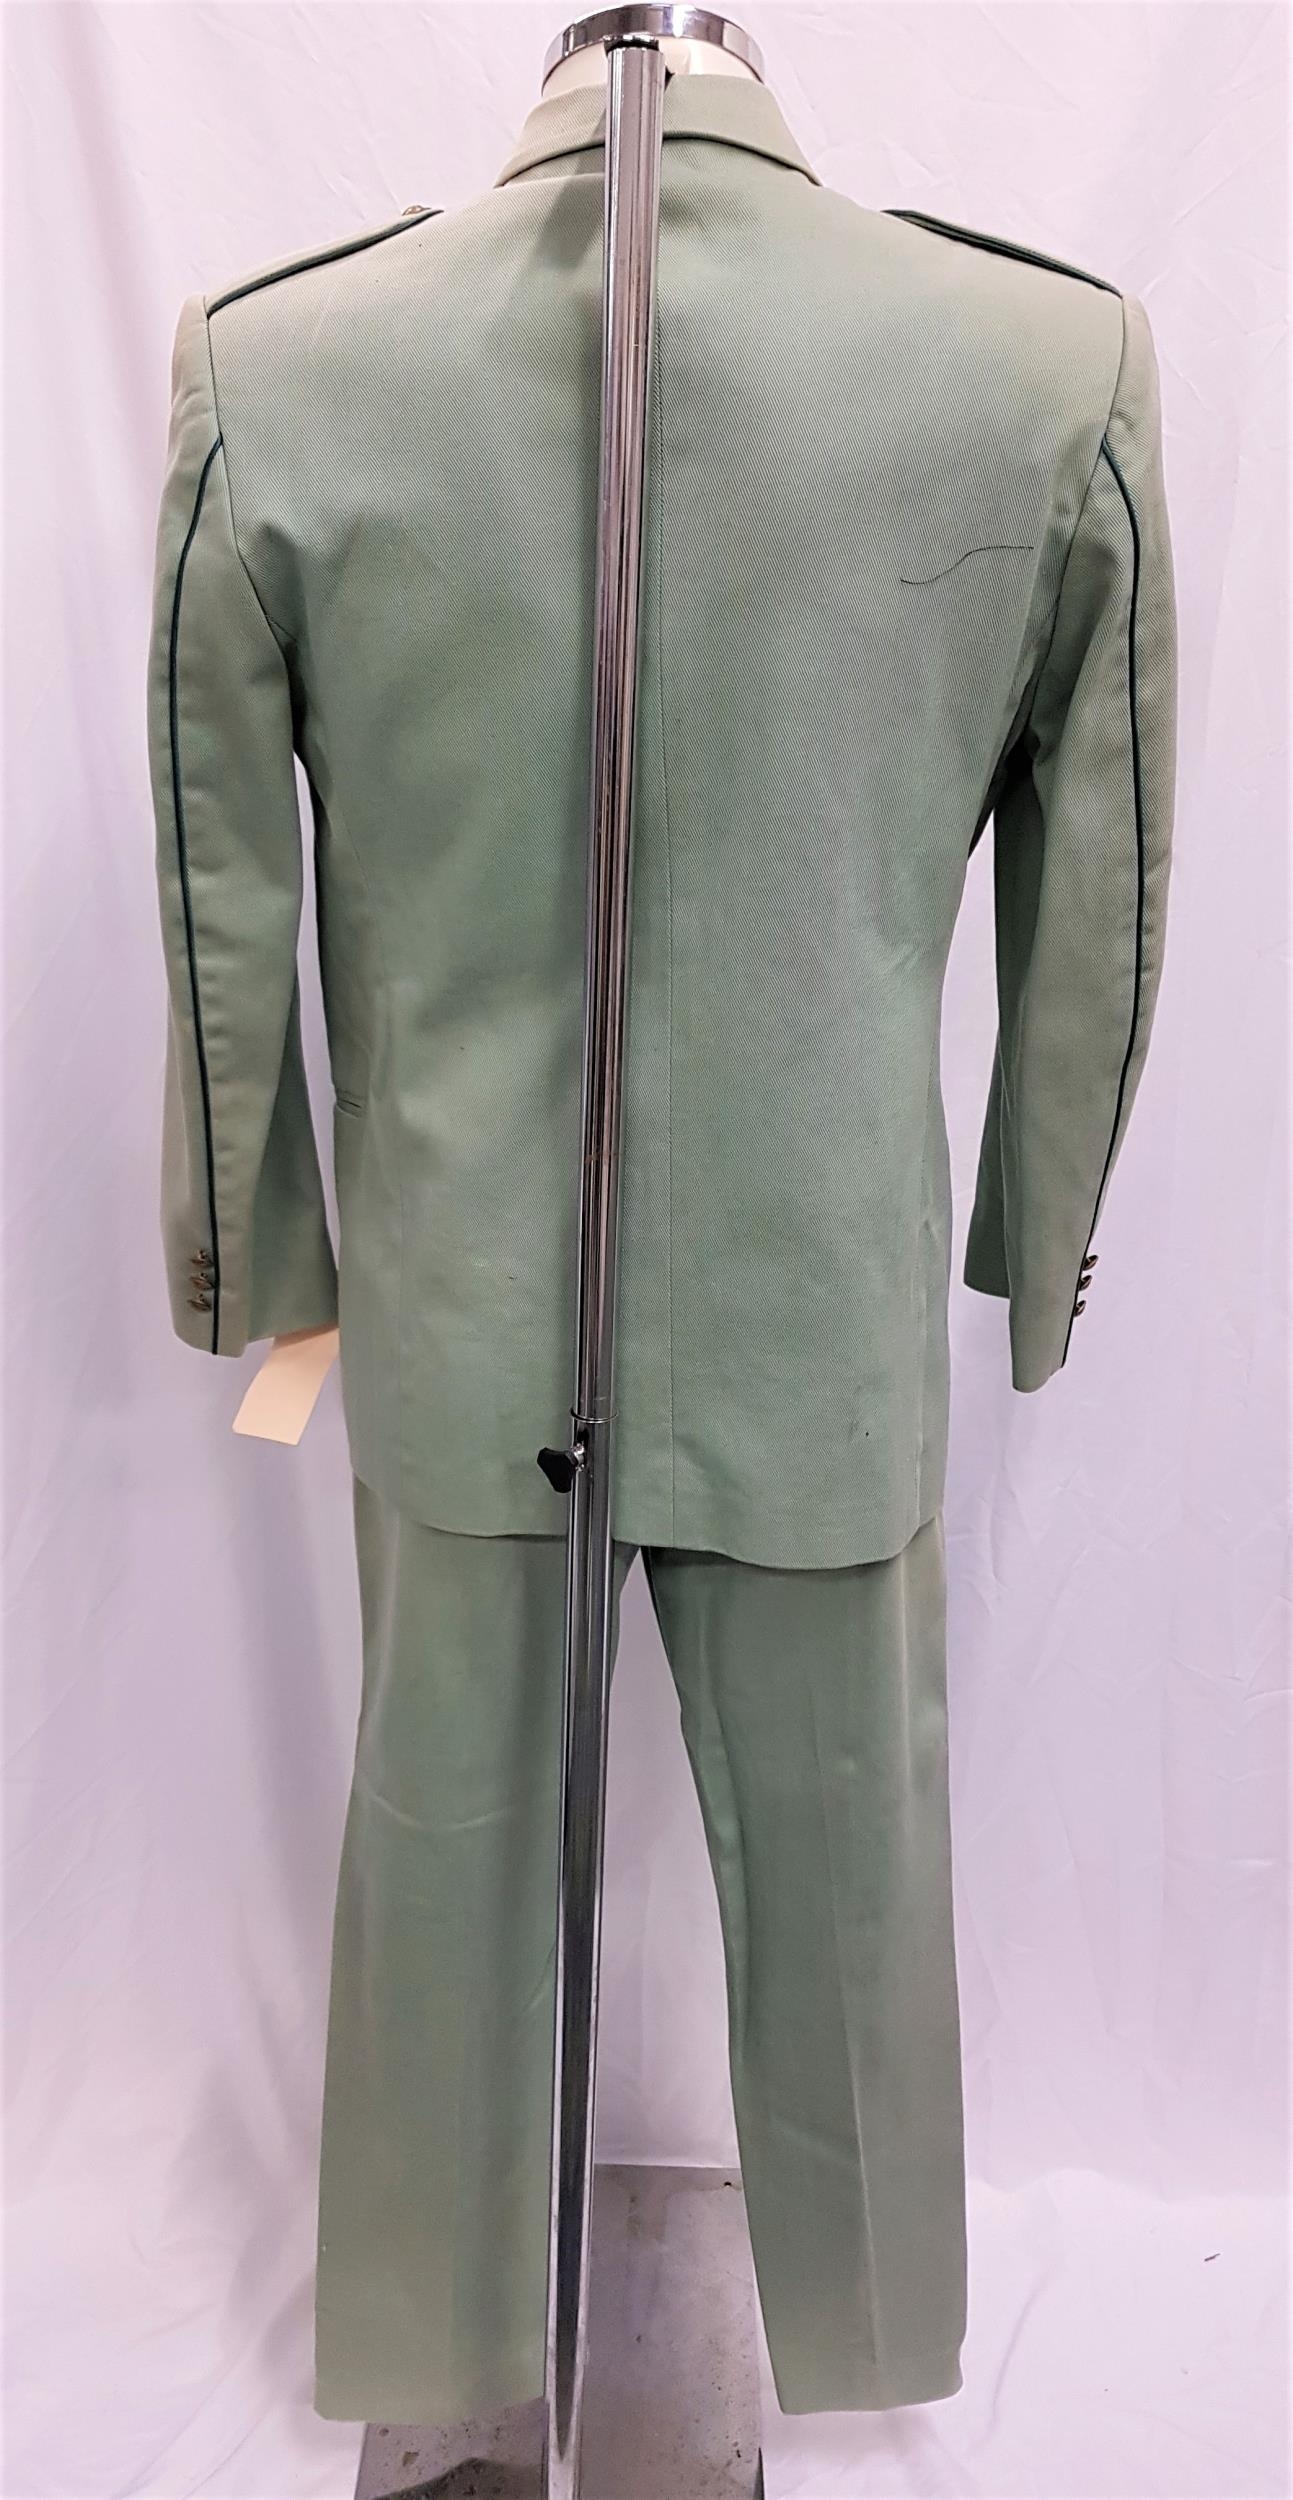 GHOST SHIP (2002) - TWO PIECE GREEN SUIT Gents mint green canvas uniform, the double breasted jacket - Image 2 of 4